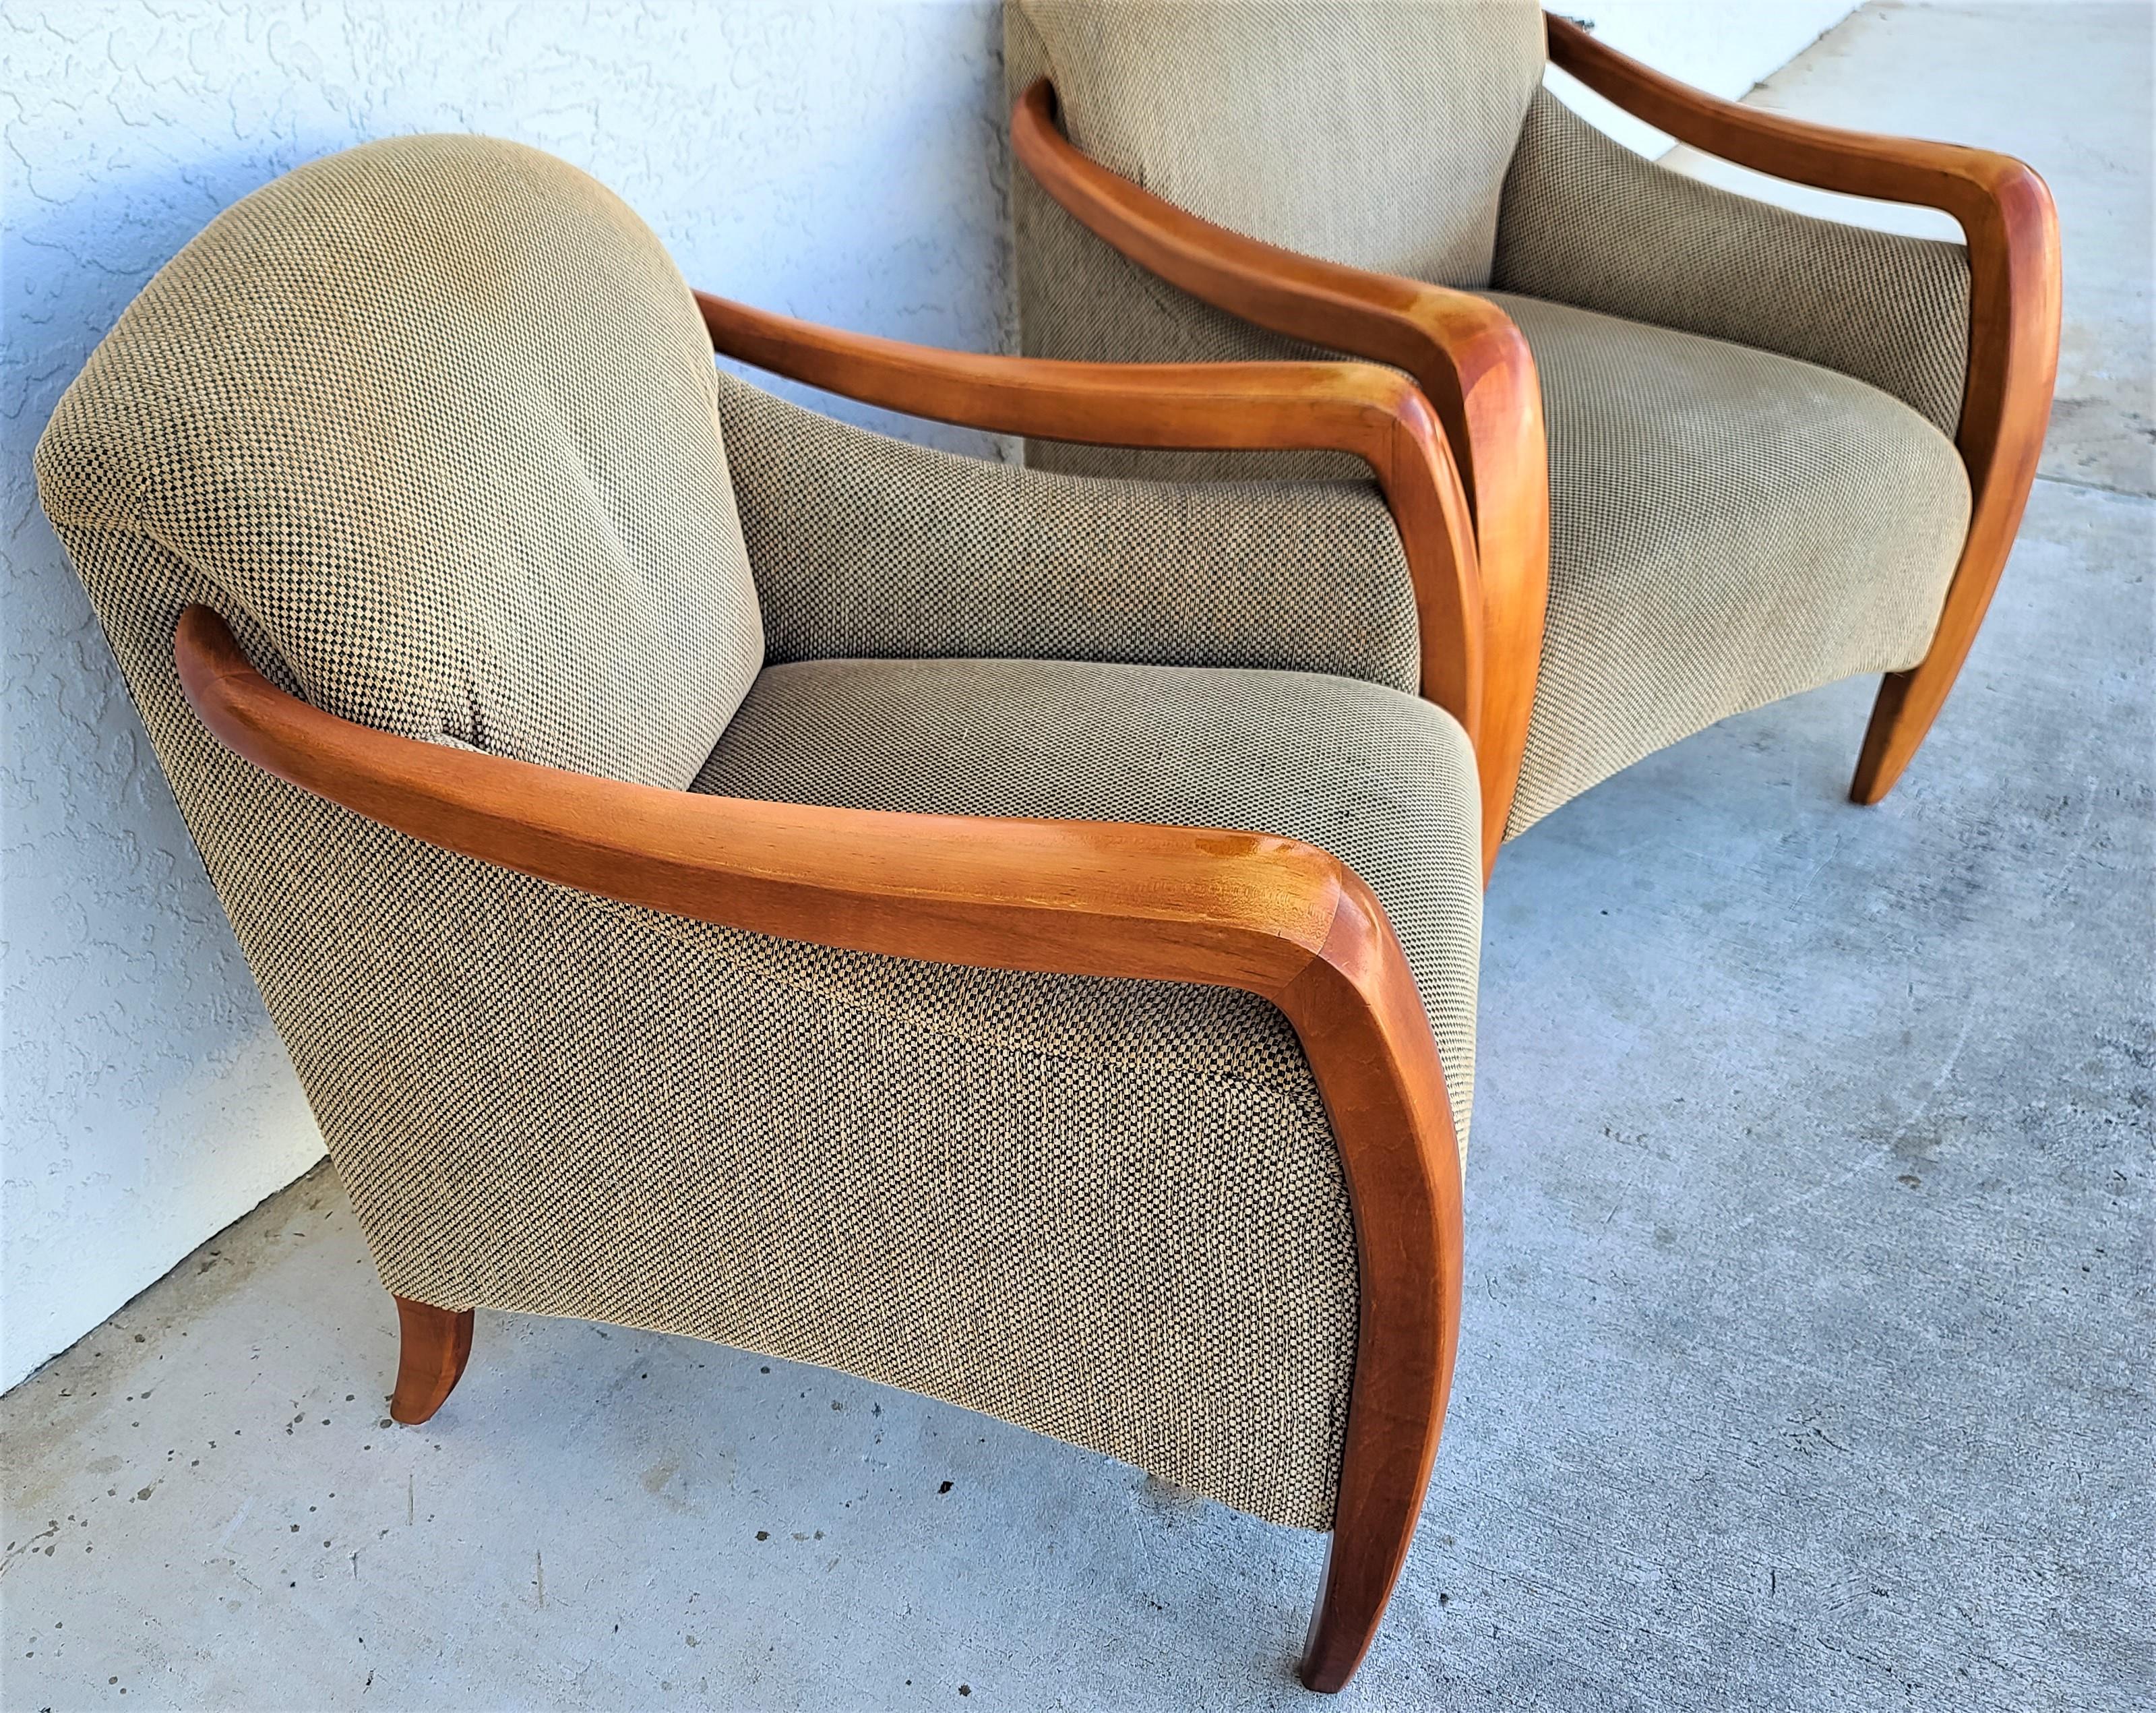 Spectacular Pair of Mid-Century Modern Upholstered Lounge Chairs 2